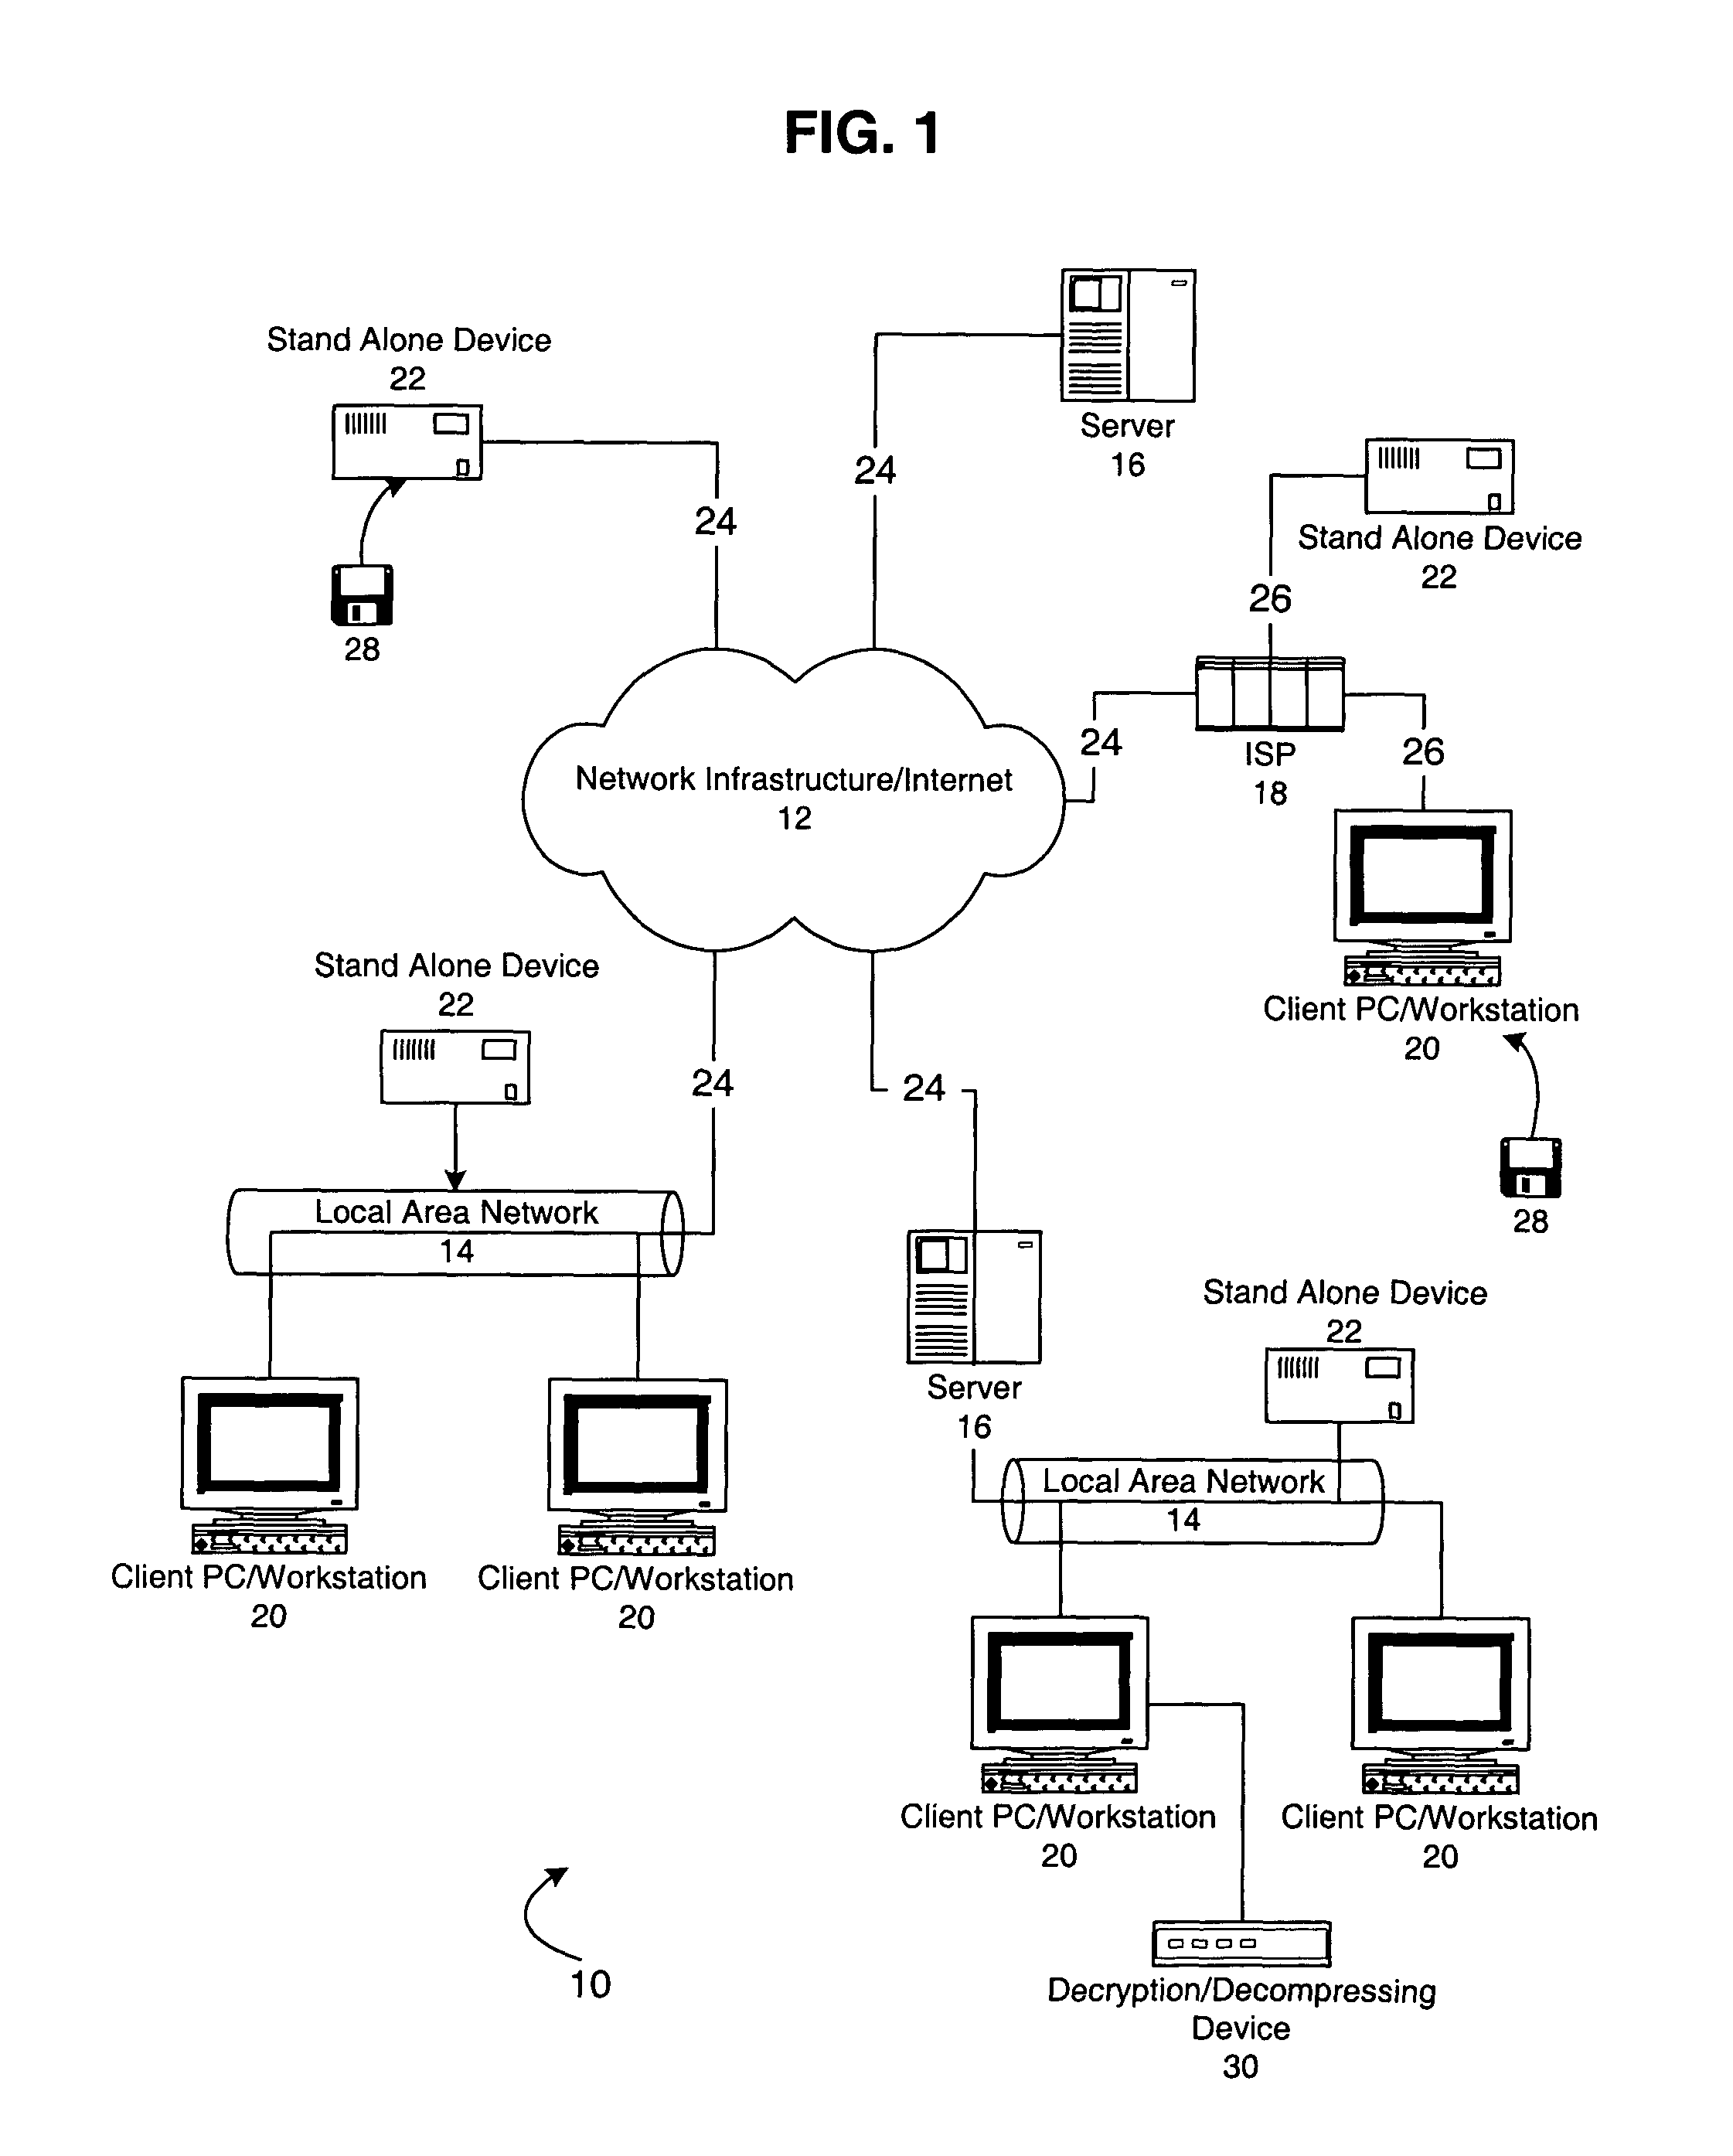 System for keying protected electronic data to particular media to prevent unauthorized copying using a compound key